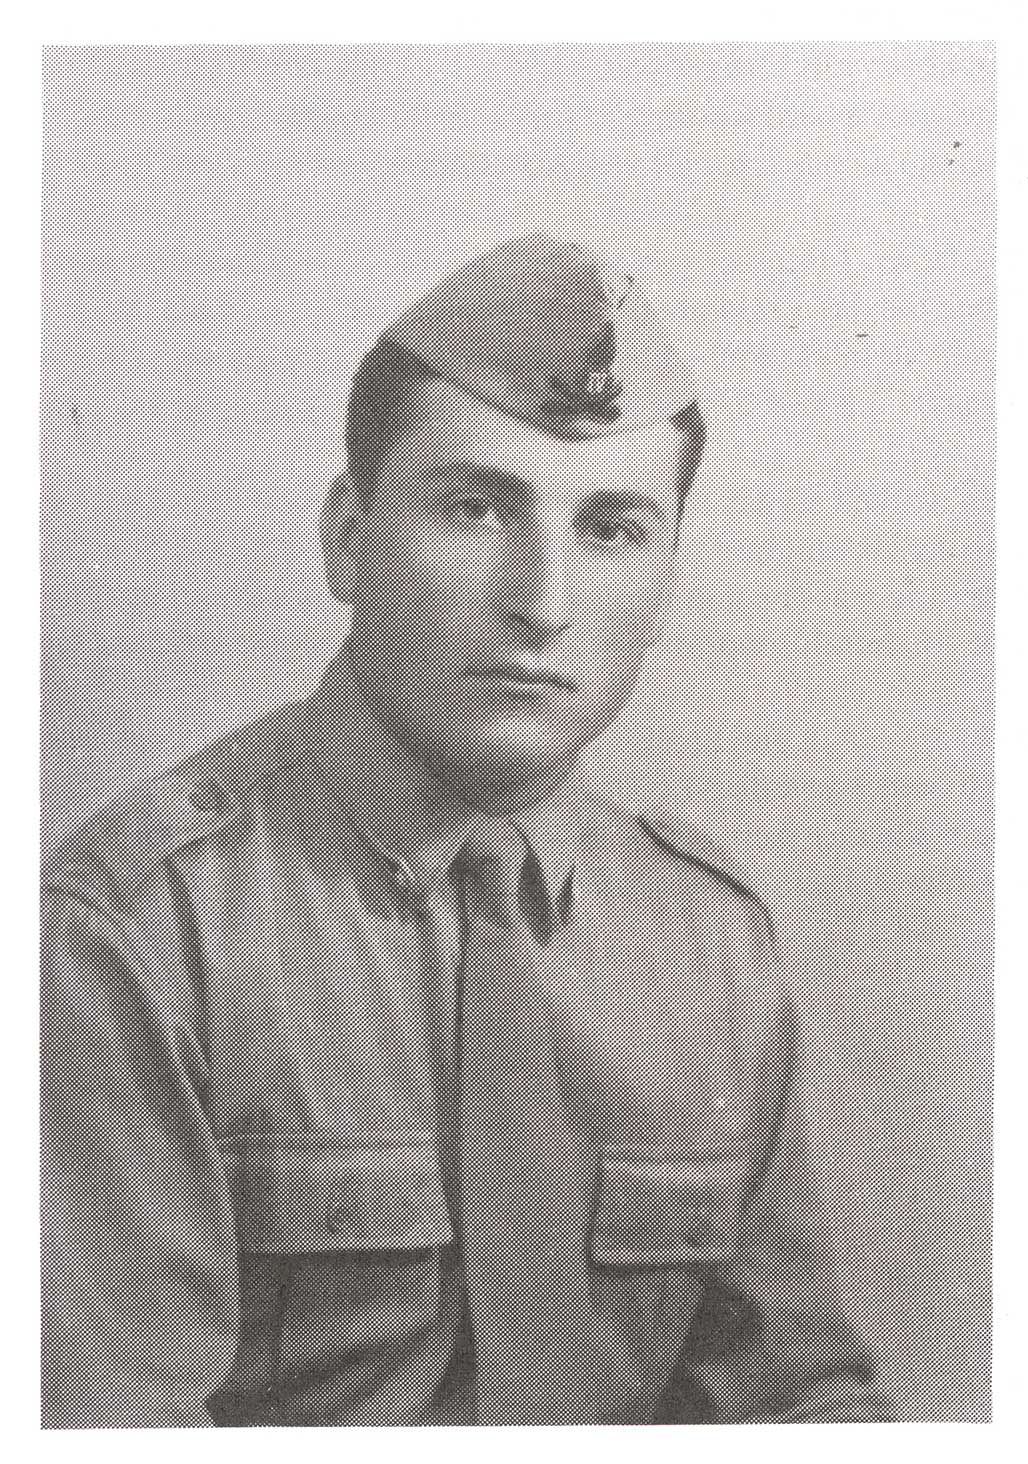 Military portrait of a young man in uniform.